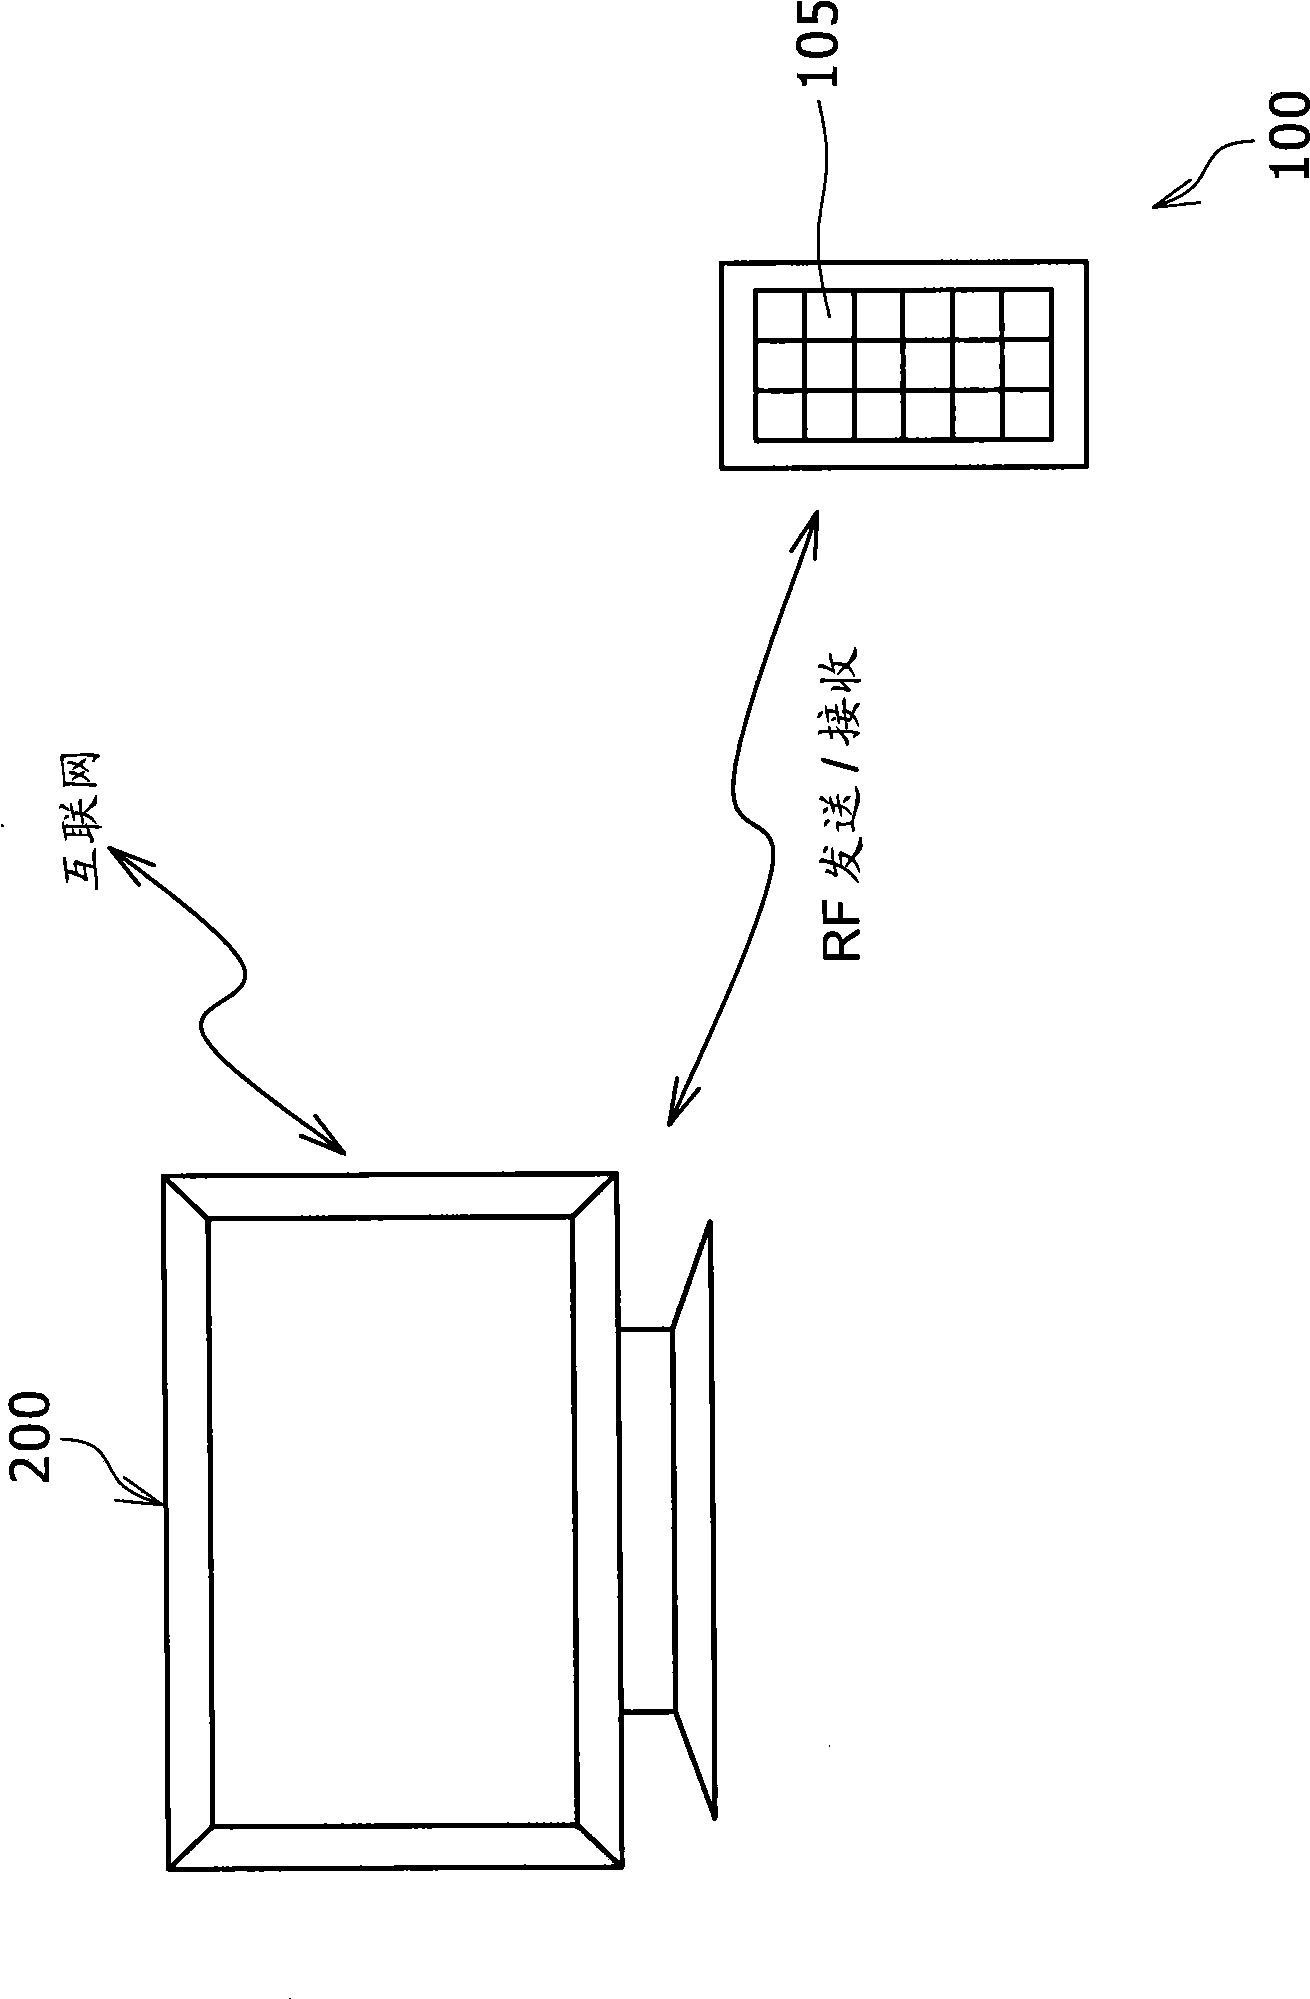 Remote control apparatus and communication system